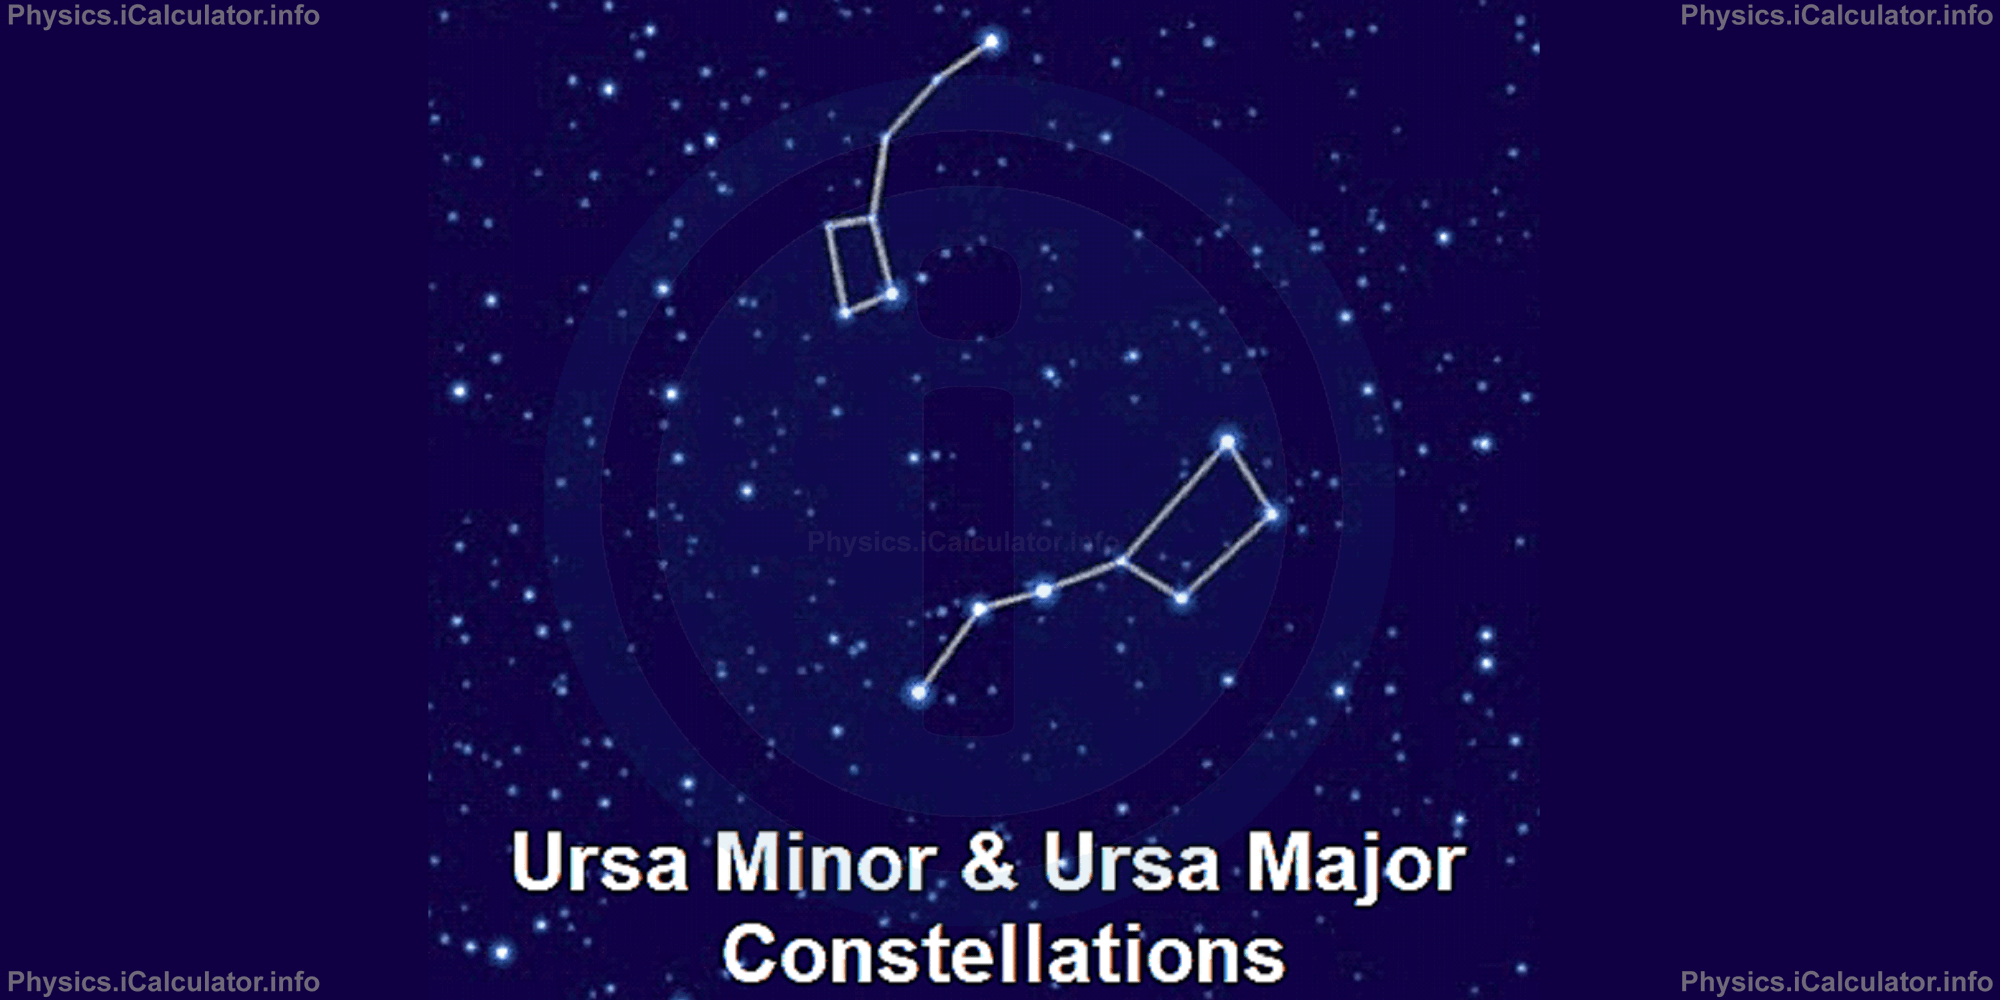 Physics Tutorials: This image provides visual information for the physics tutorial Orientation in the Sky and Constellations 